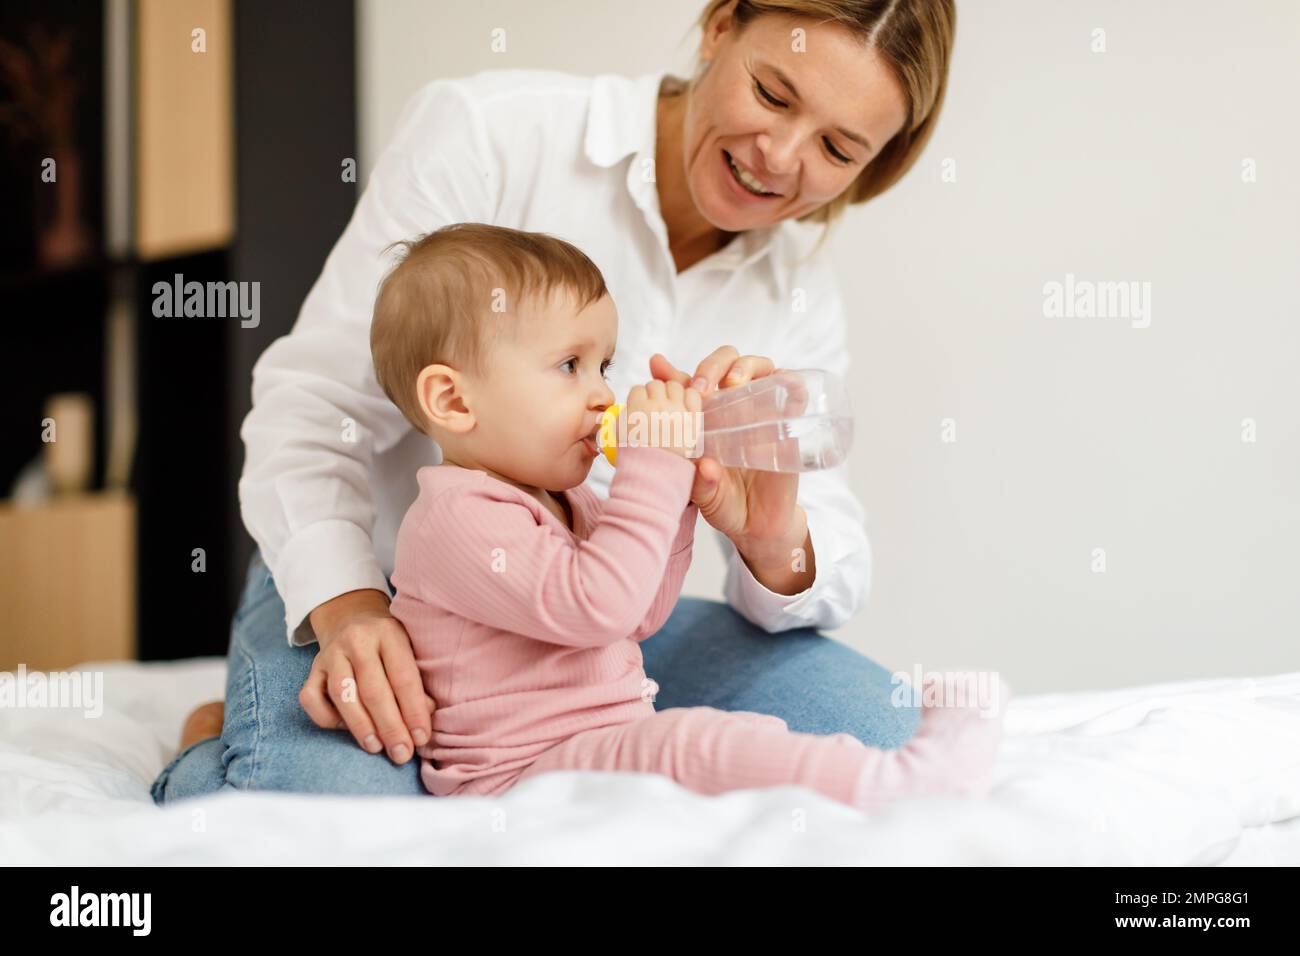 Baby hydration. Caring mother giving water bottle to her infant child, sitting on bed at home, copy space Stock Photo